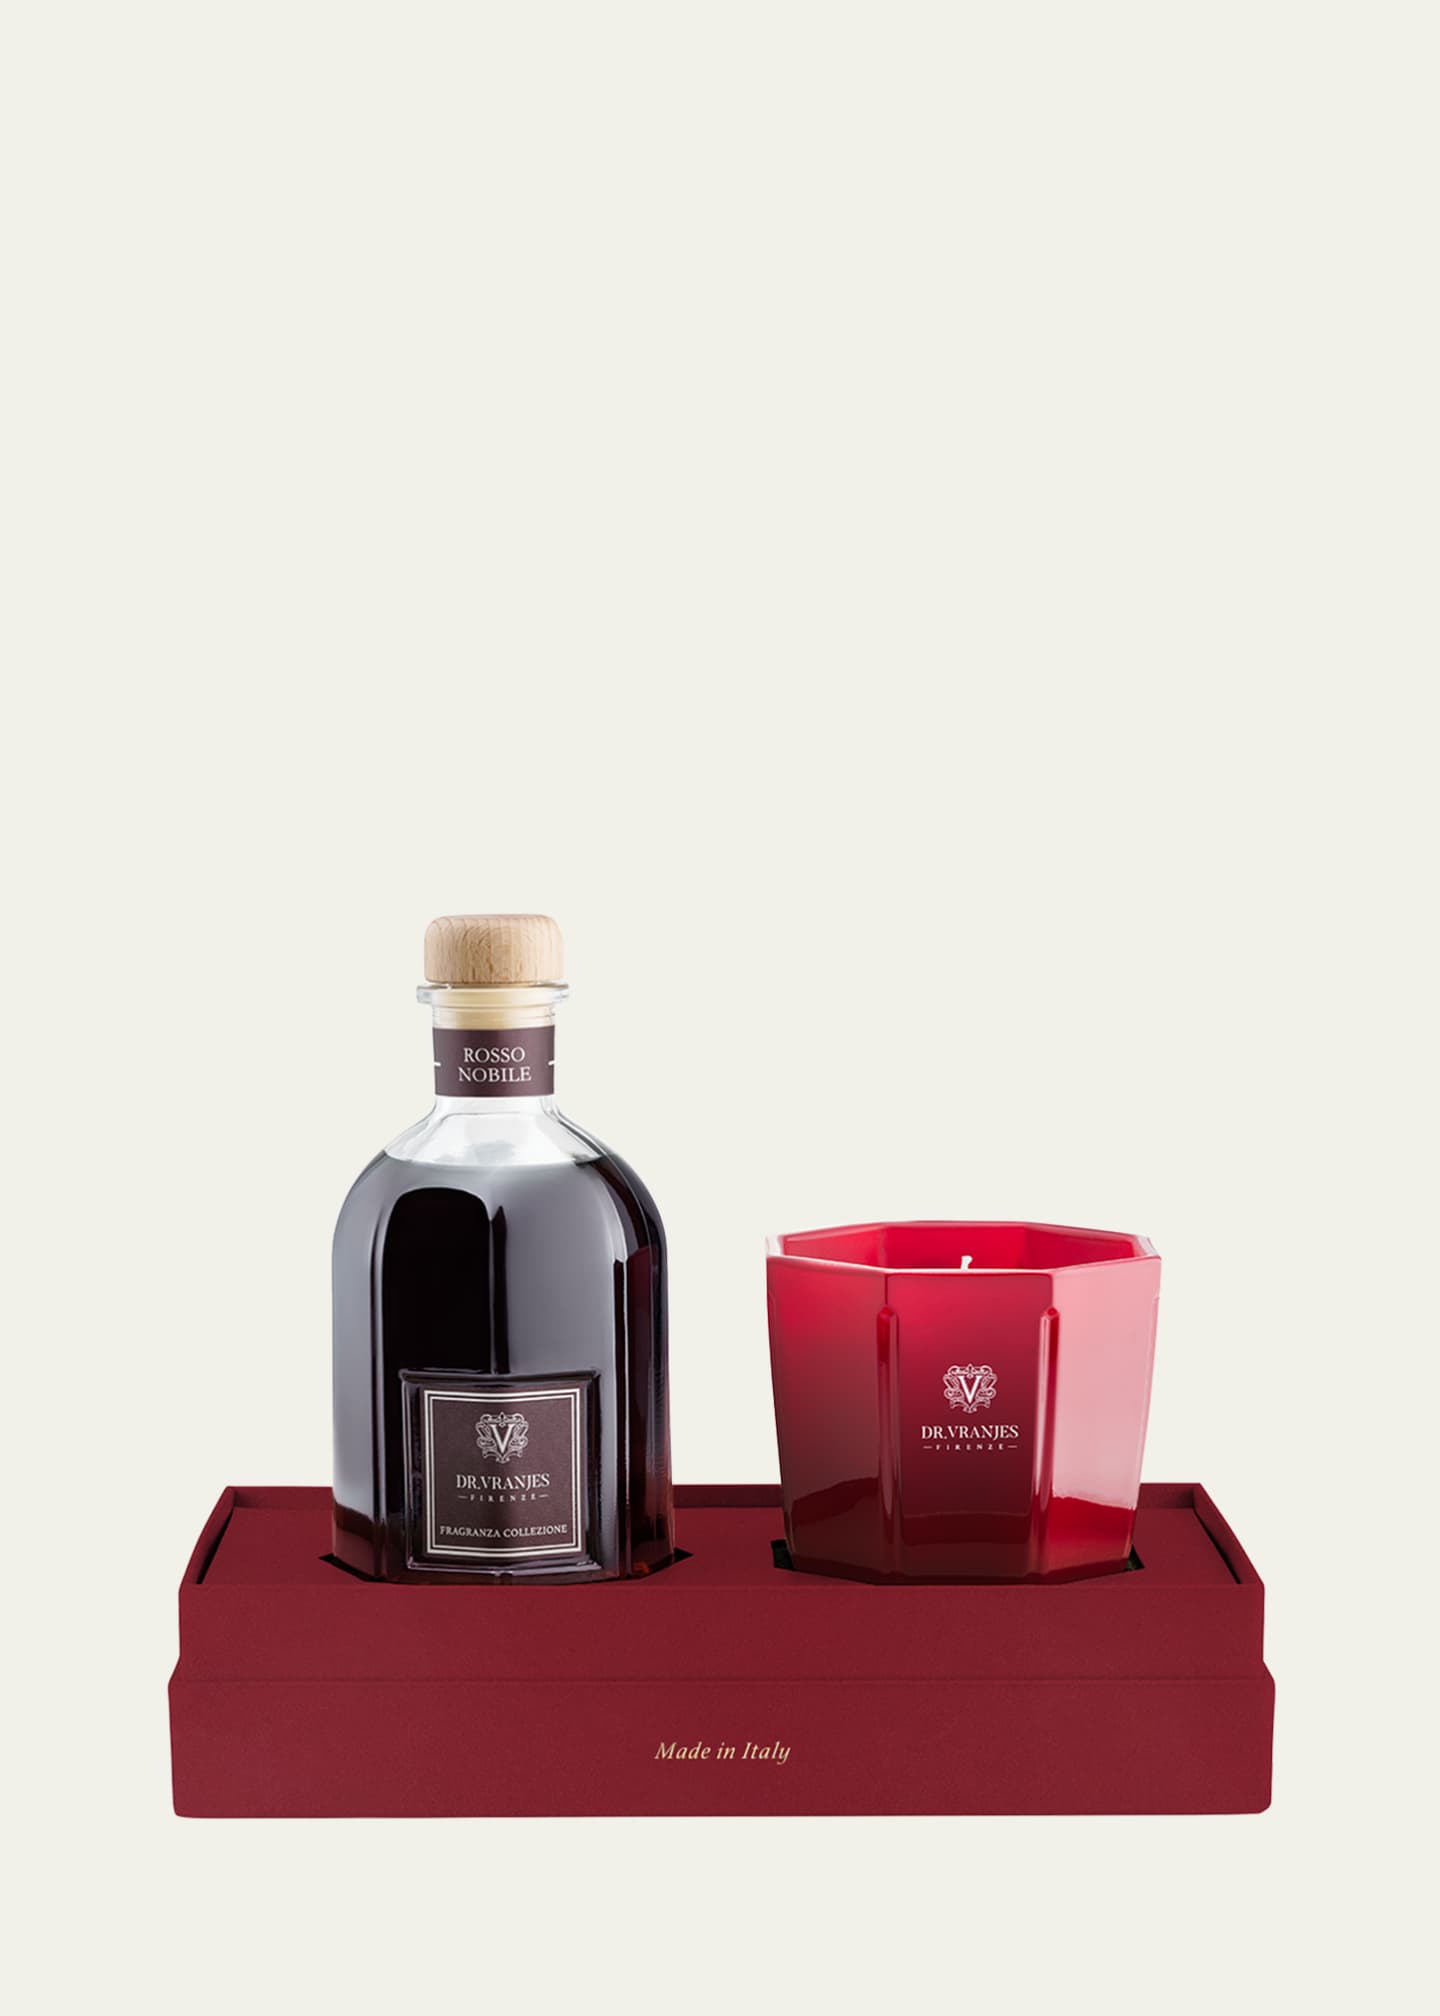 Dr. Vranjes Firenze Rosso Nobile 8.4 oz. Diffuser and Candle Holiday Gift  Set - Bergdorf Goodman